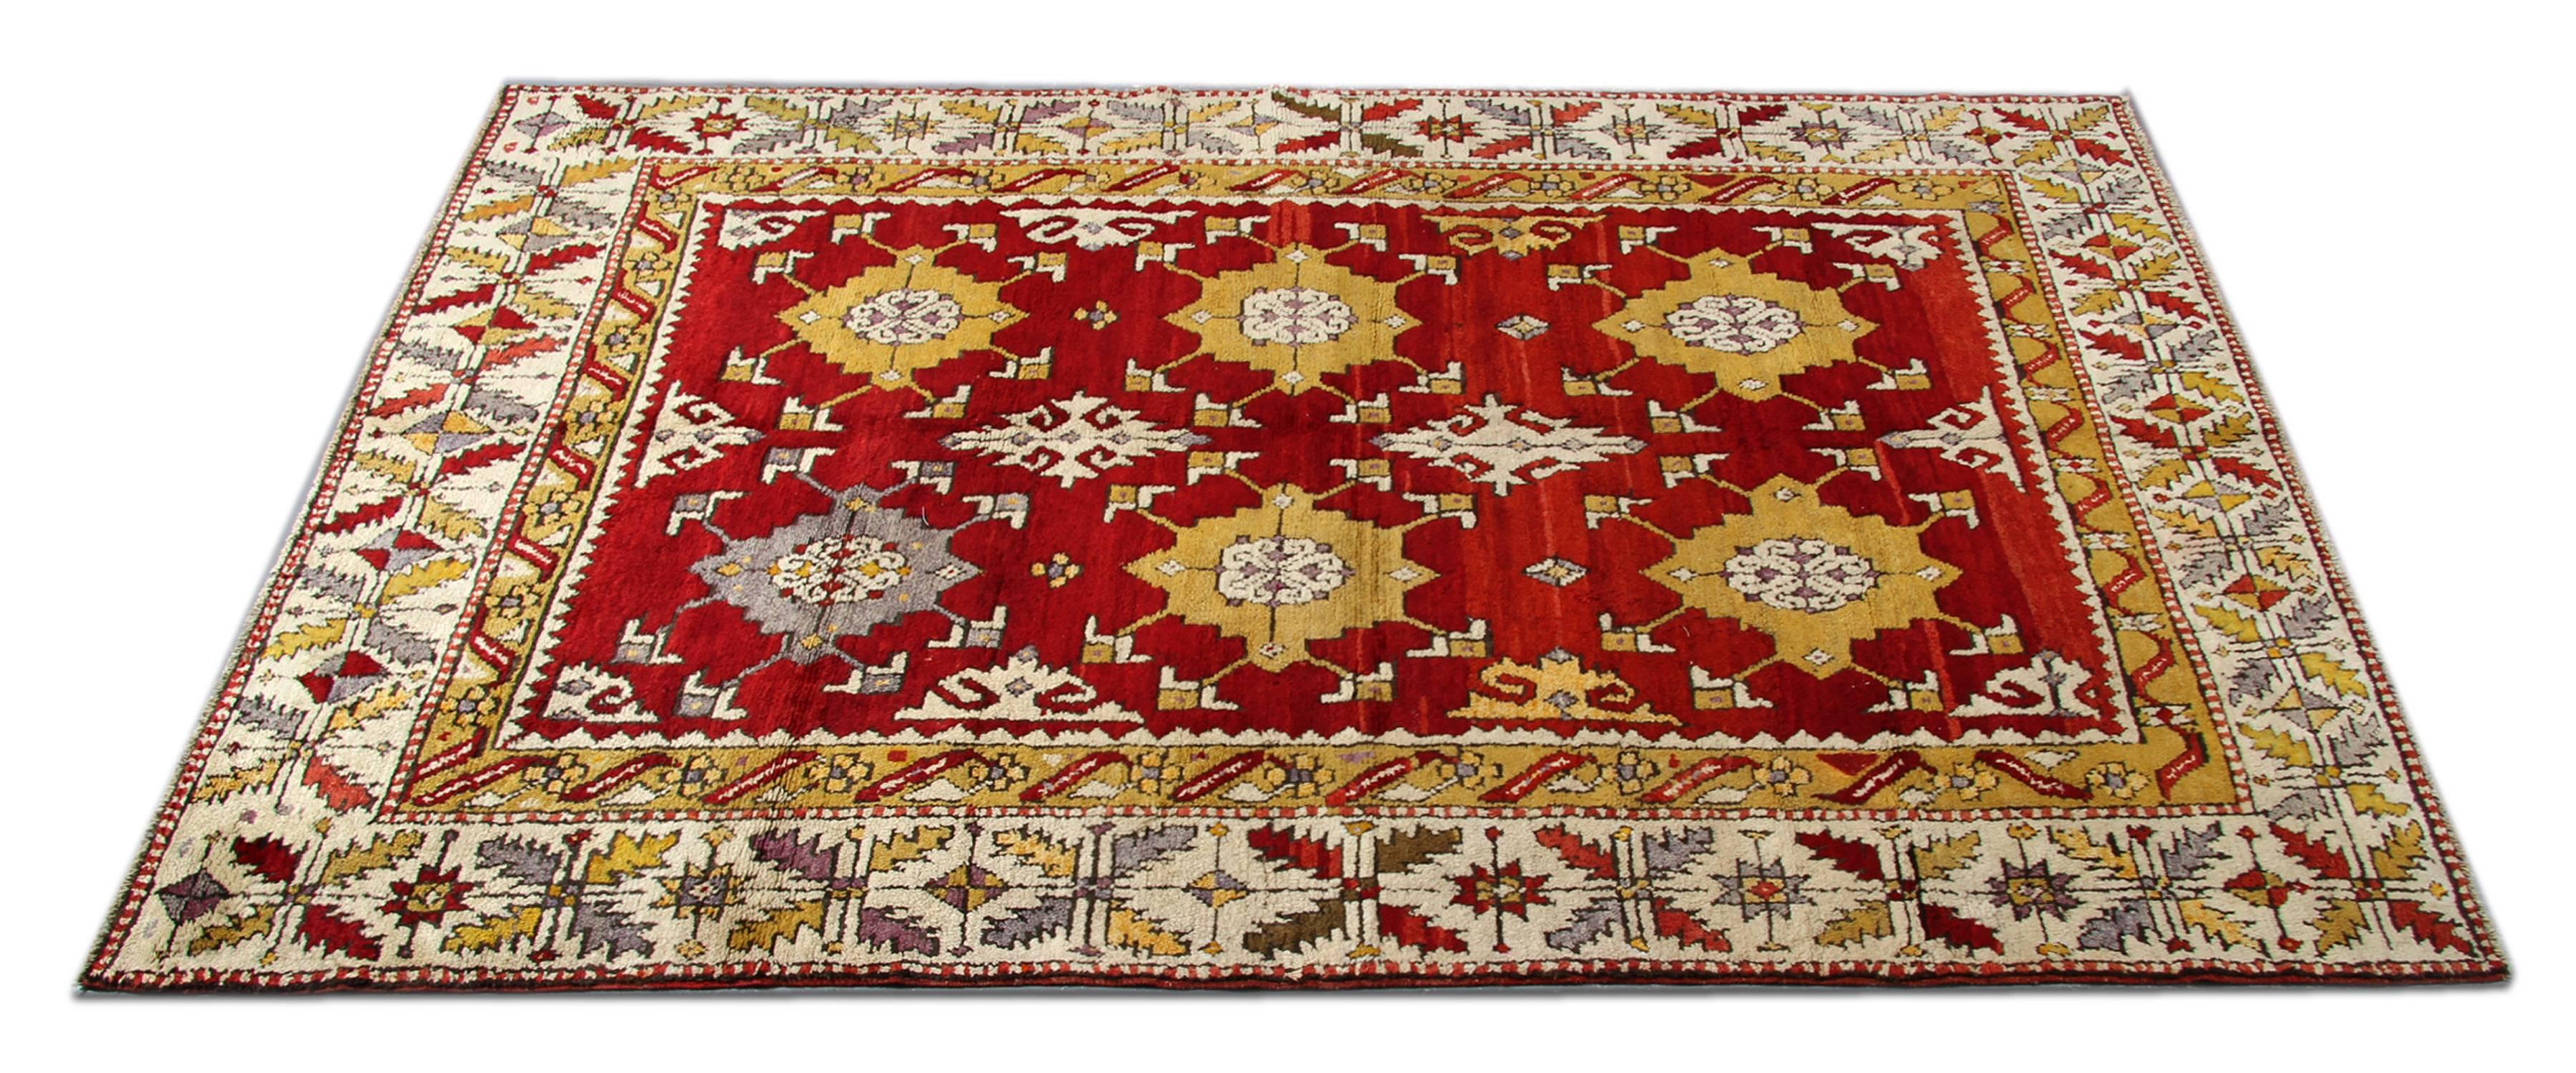 Old handmade carpet Anatolian rug with a red rug background and contrasting gold and grey colour flowing freely in the geometric pattern. This traditional rug from central Tukey in an excellent condition and can be a very good element of design as a